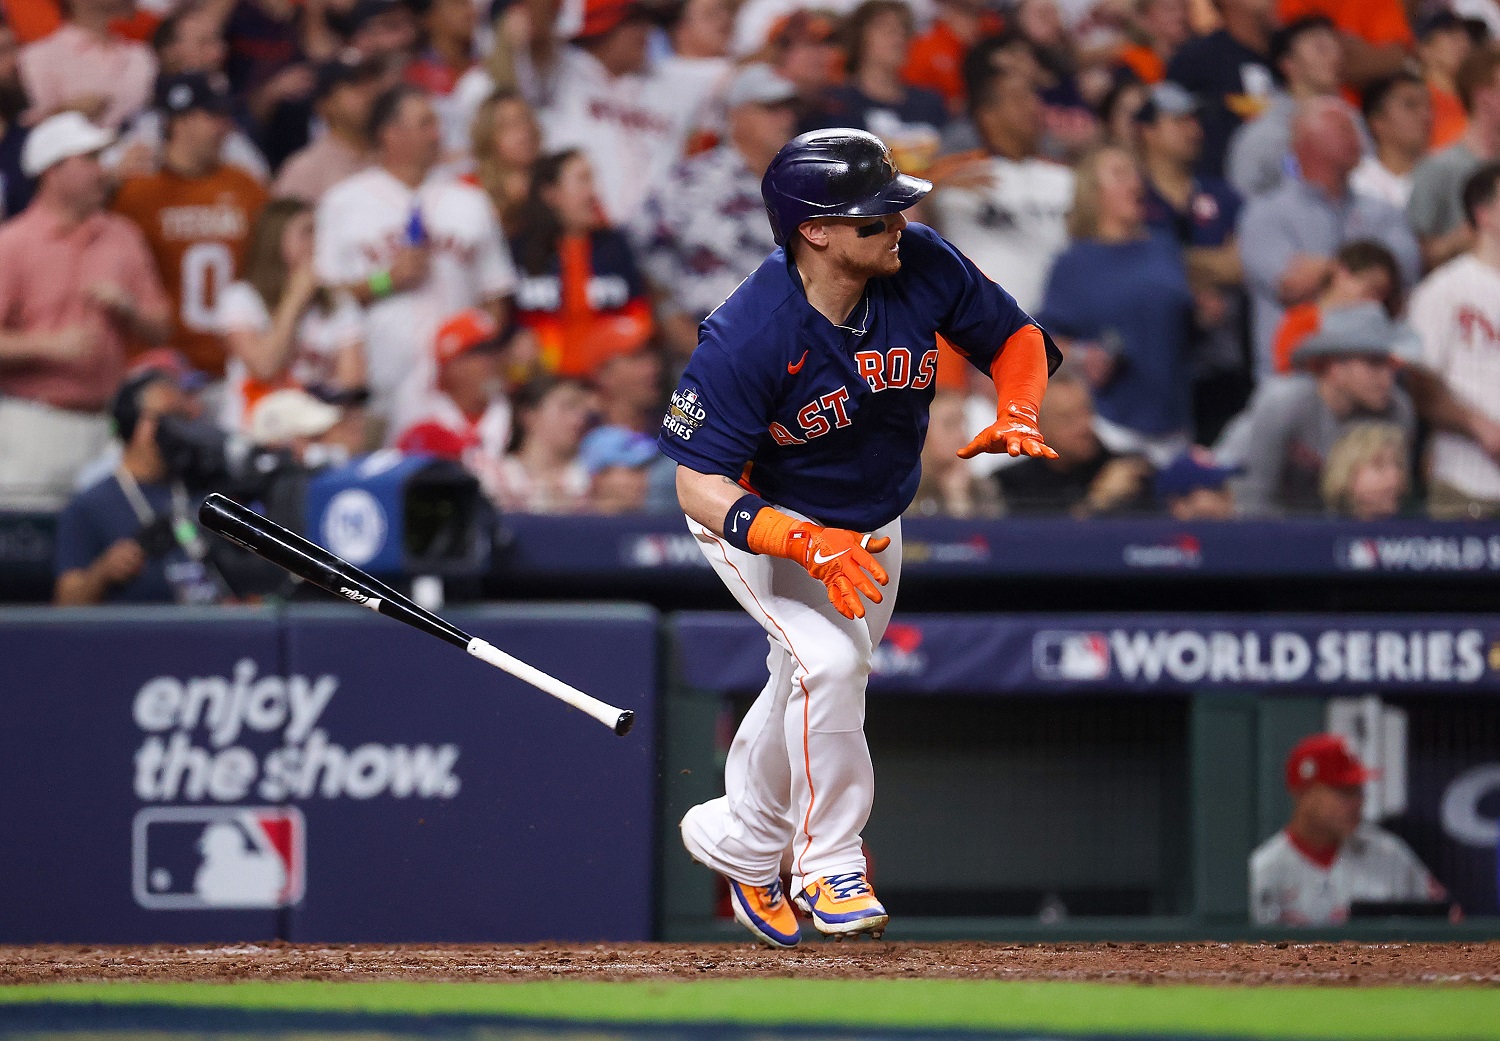 Astros Open Forum: What Did We Learn From the 2019 Spring Training